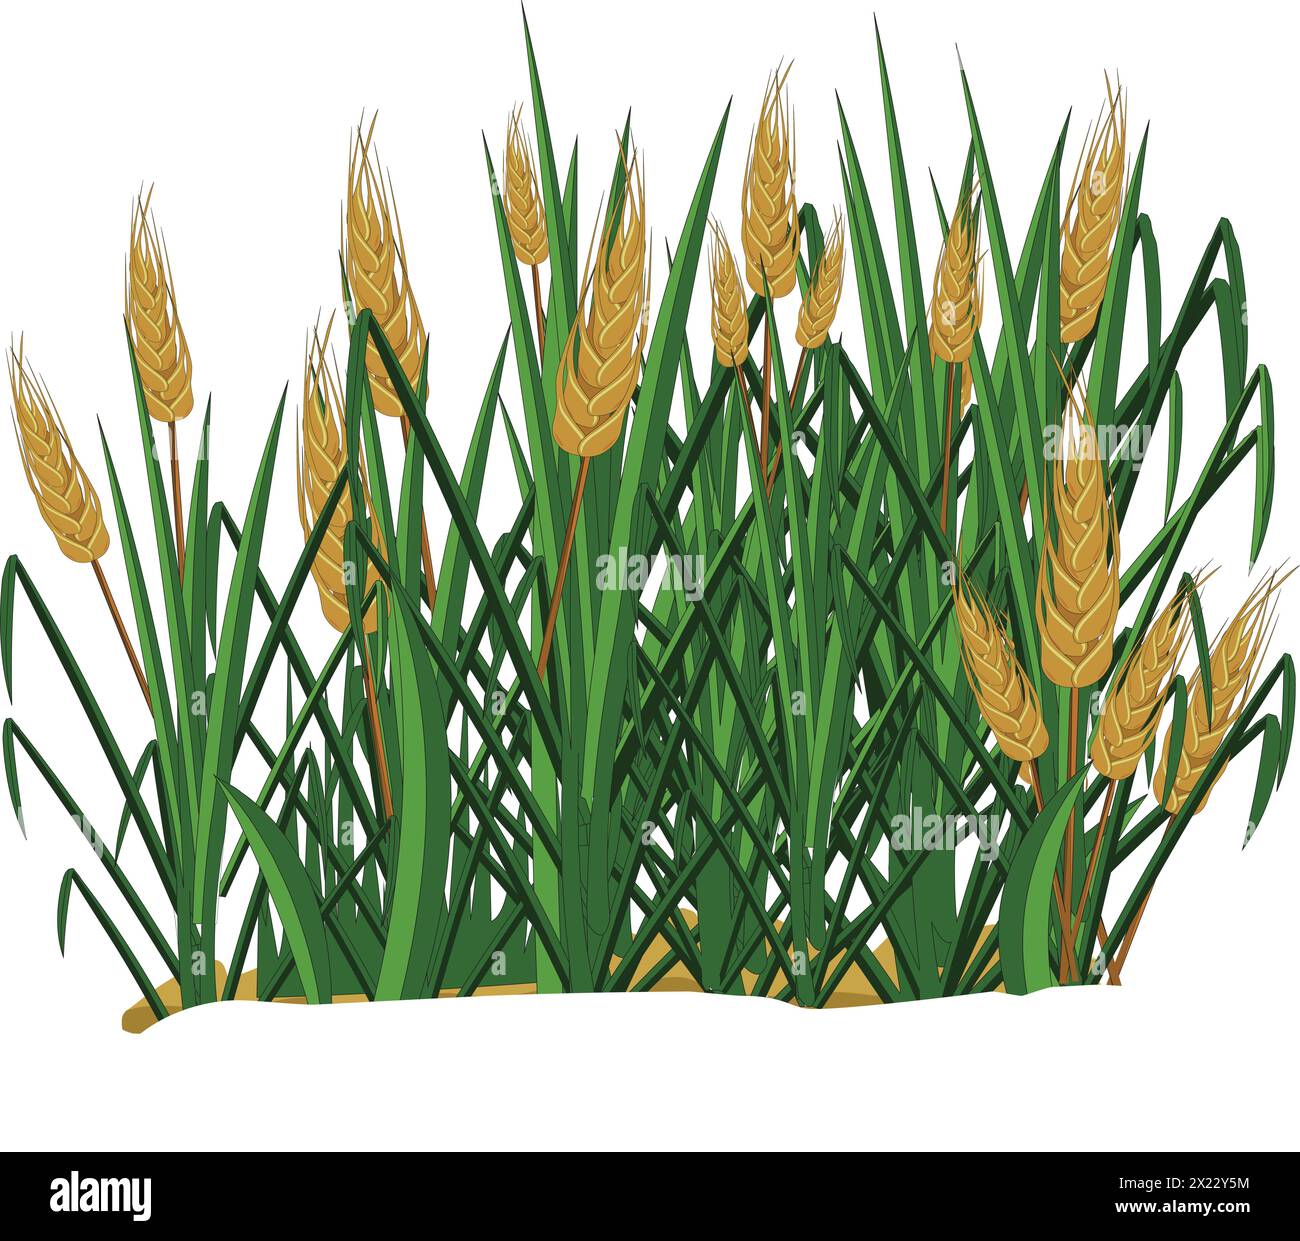 Vector illustration showing wheat plants in a field Stock Vector